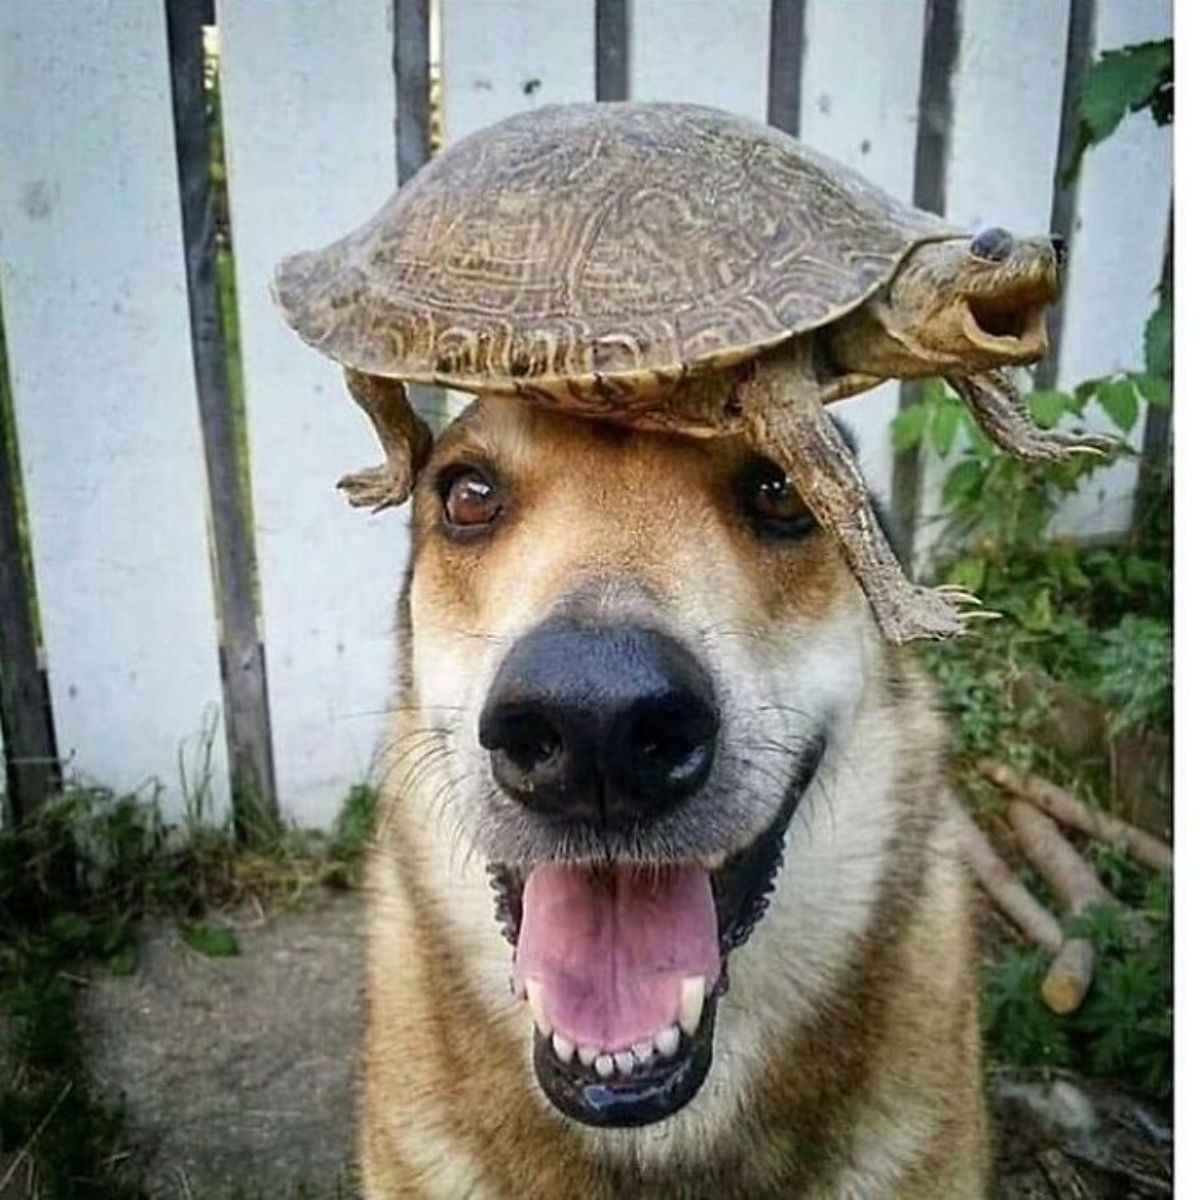 turtle on a brown and white dog's head with both of them having their mouth open